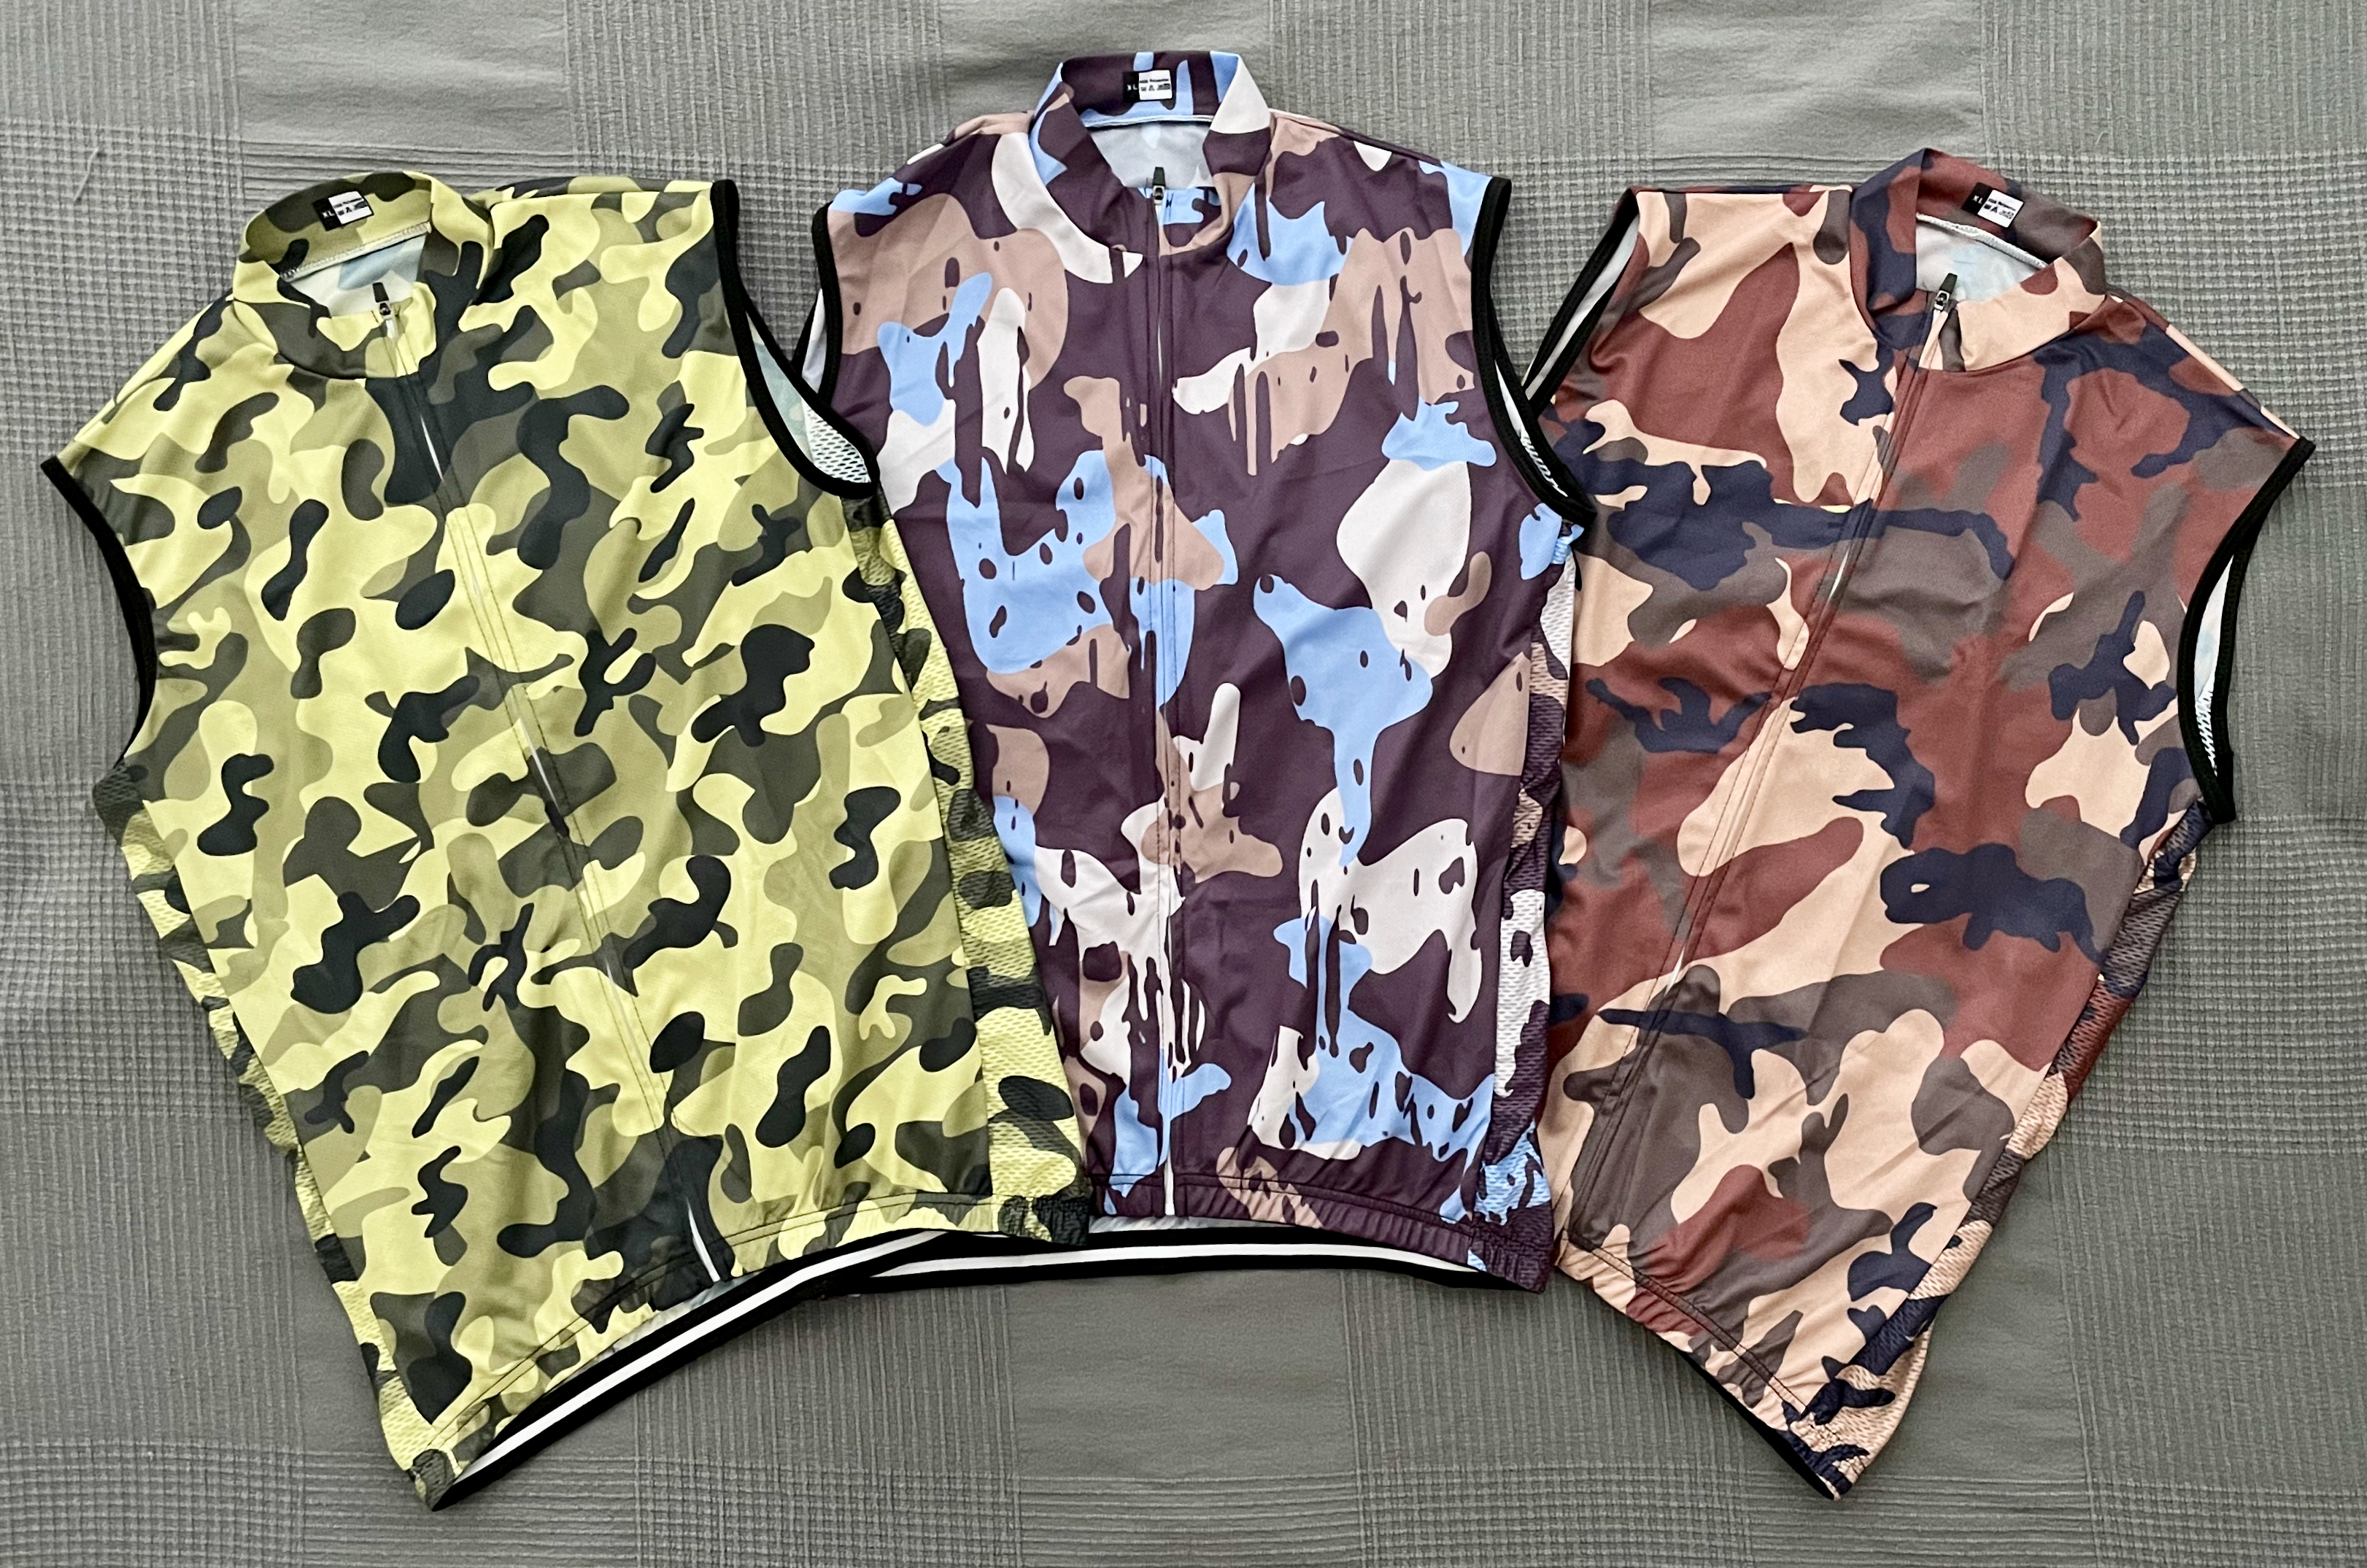 Camouflage cycling vests.